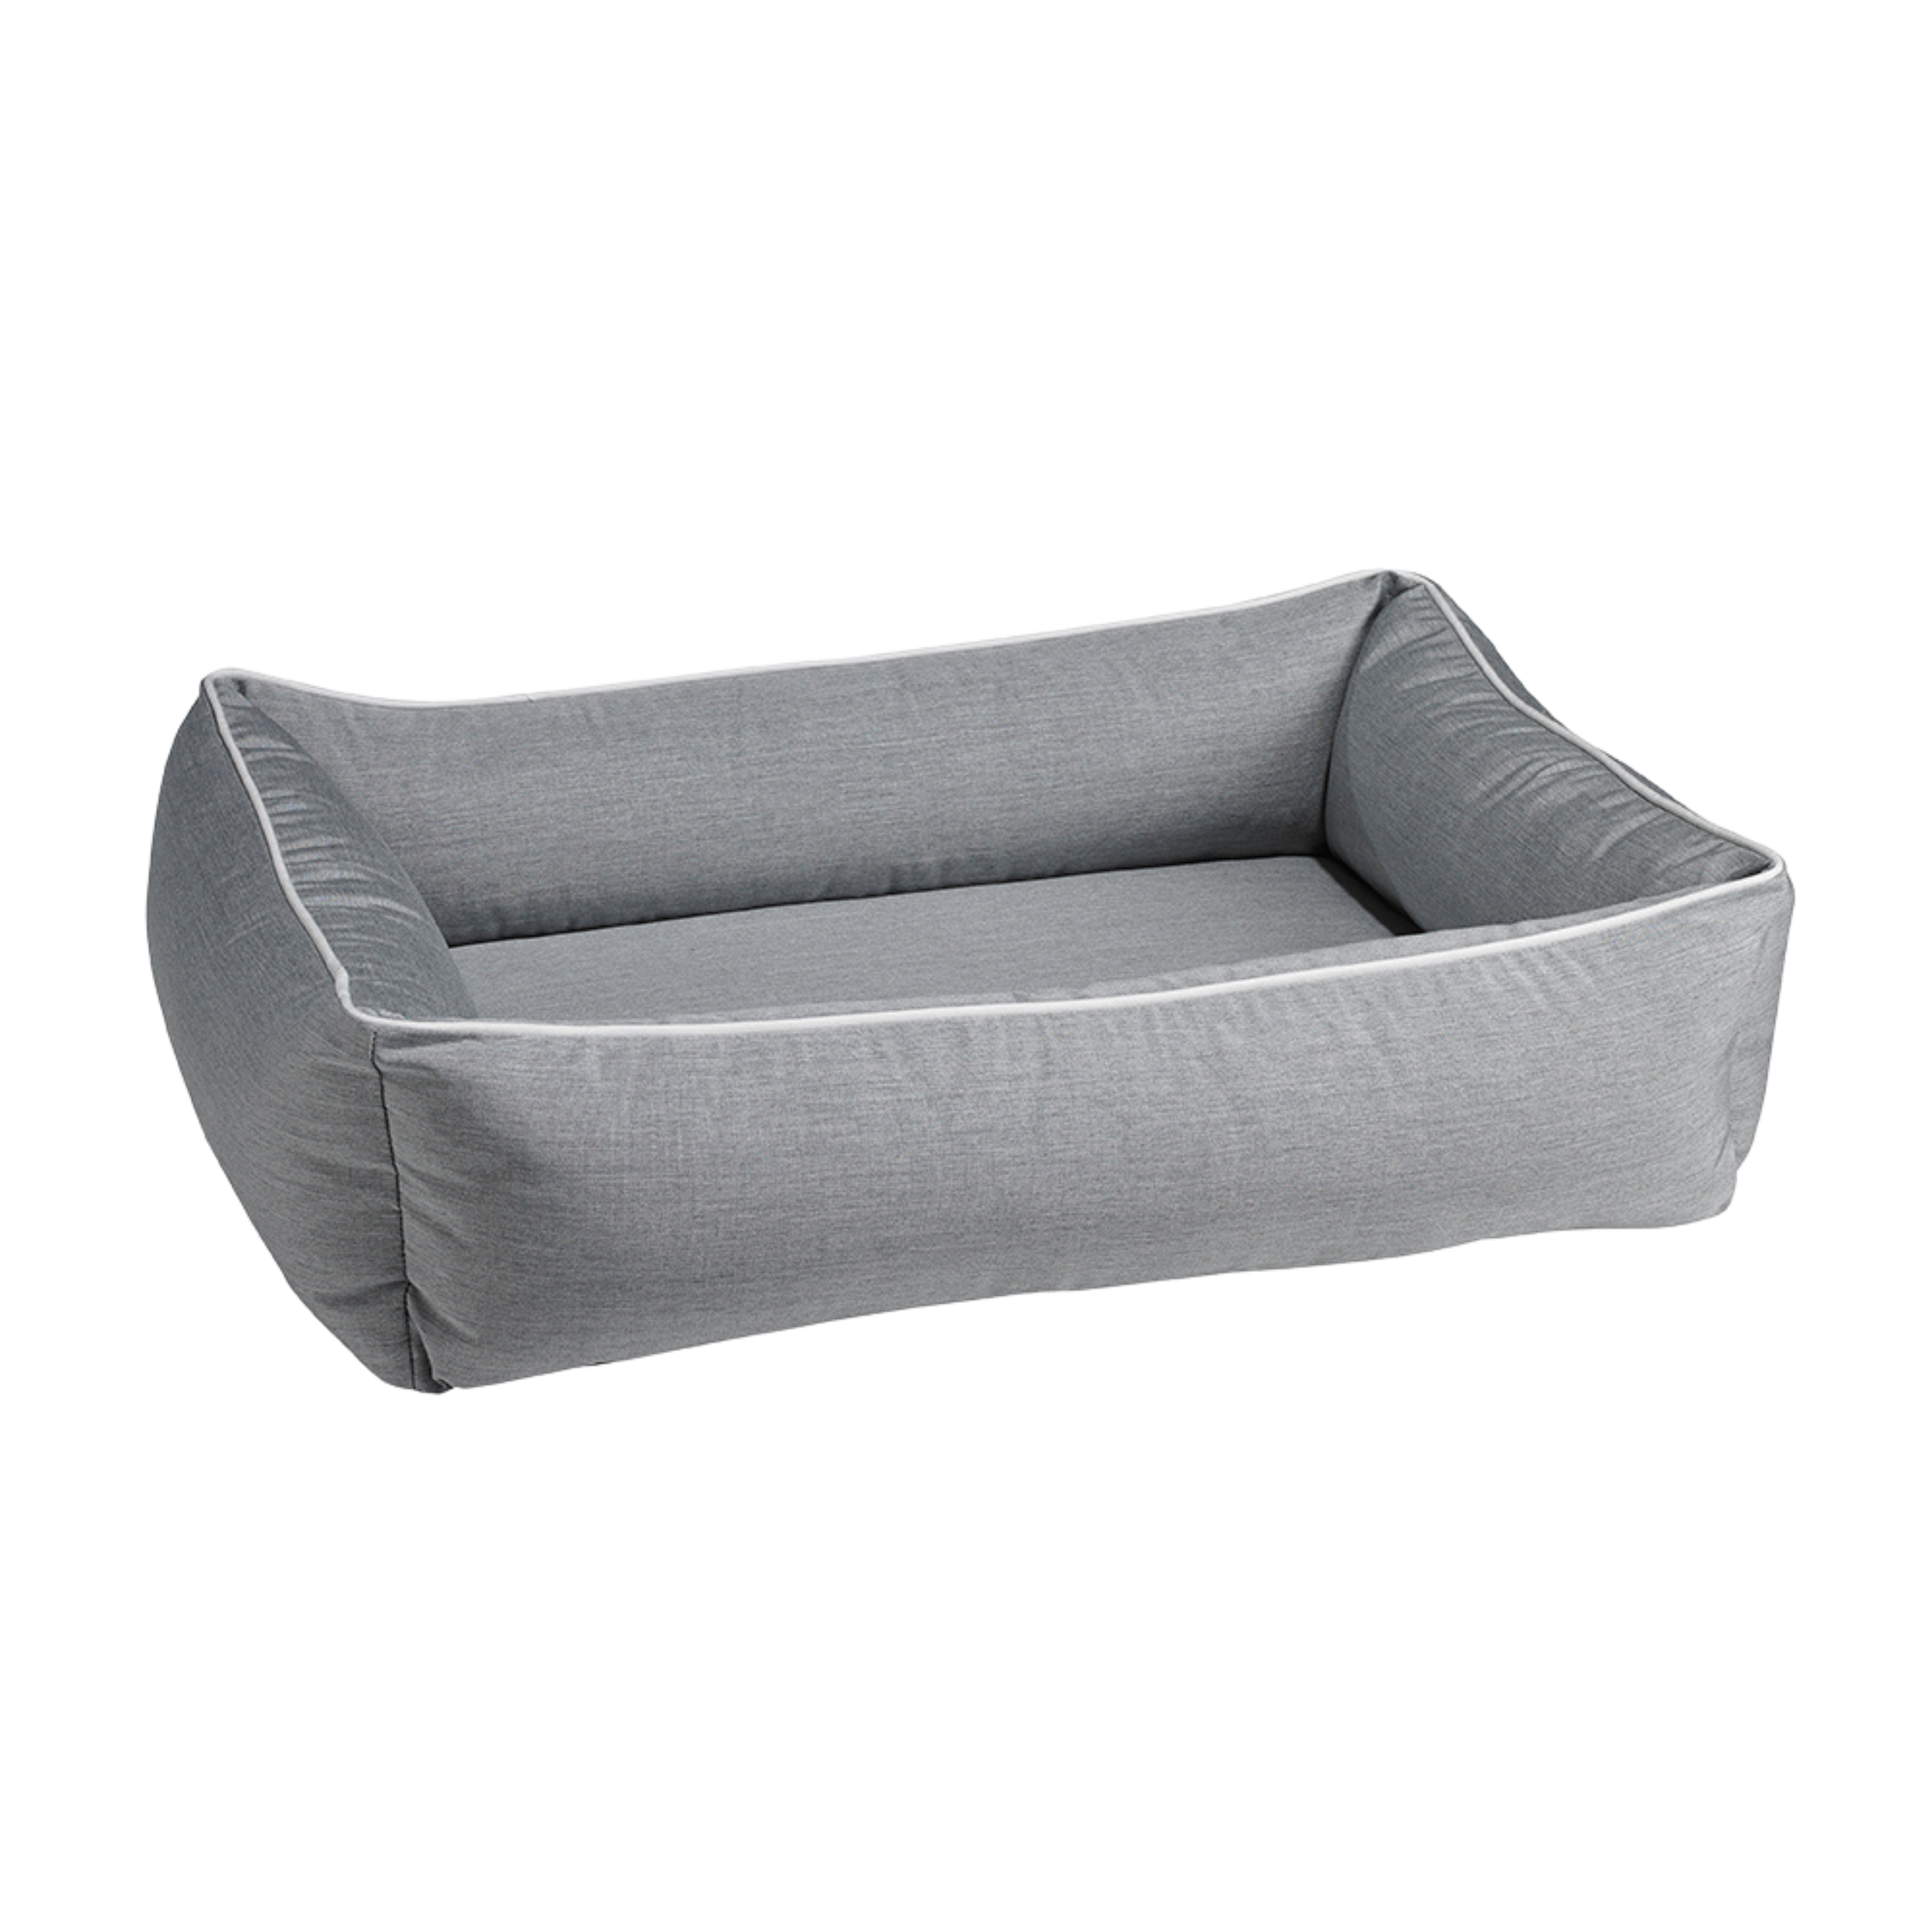 HEATHER-GRAY-URBAN-LOUNGER-DOG-BED